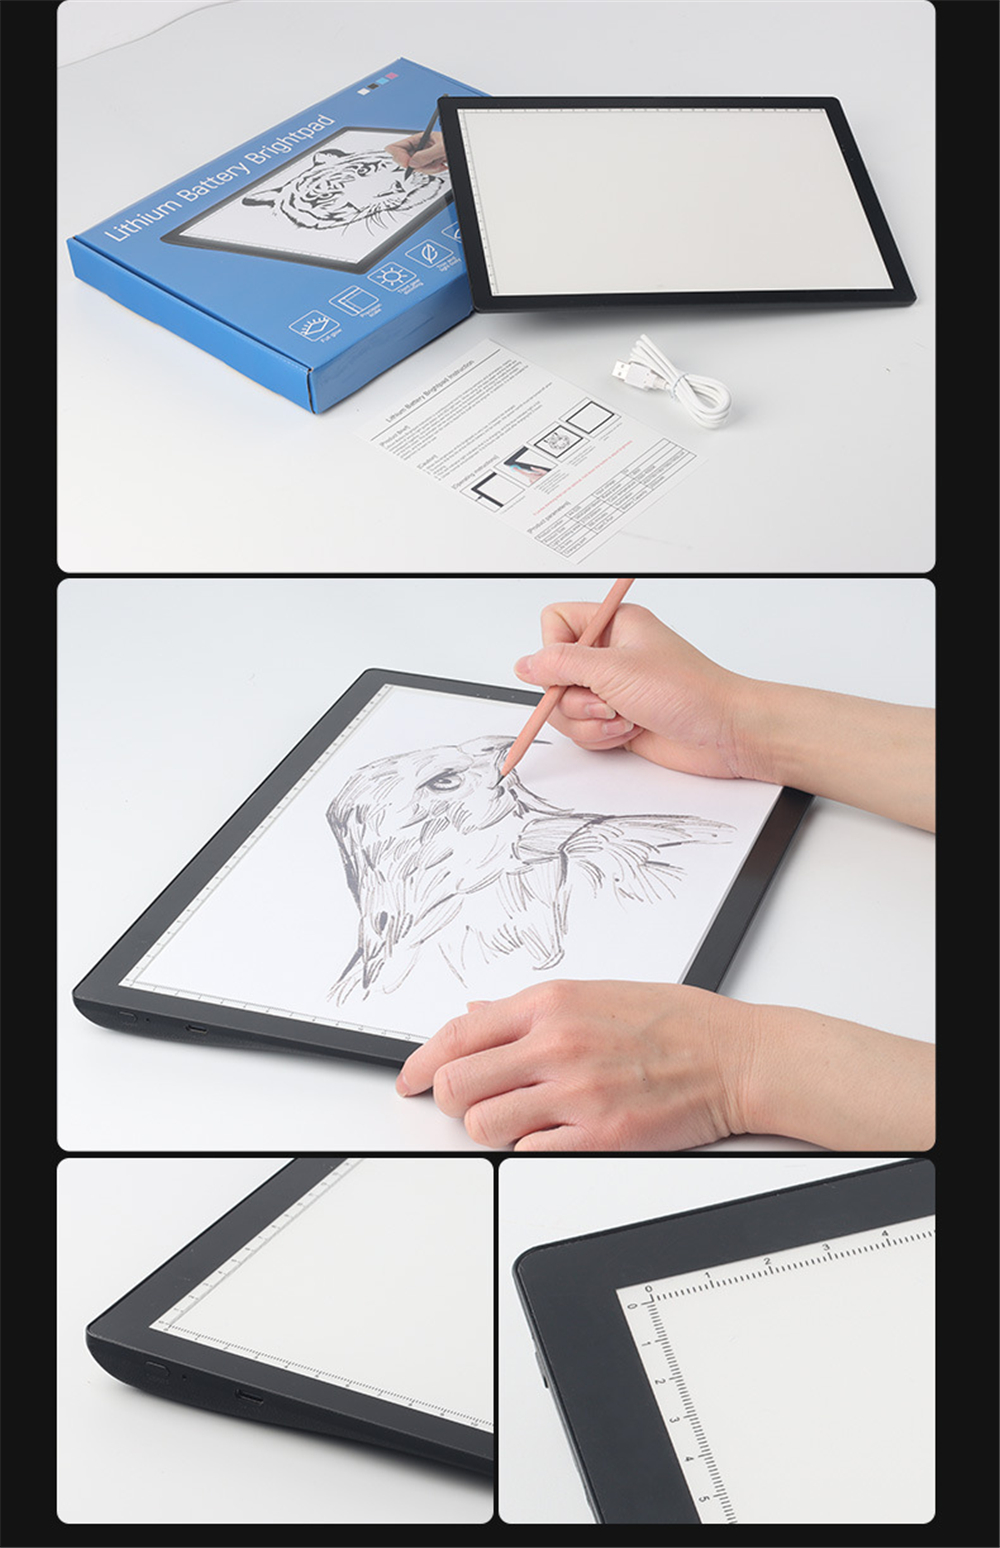 A4-LED-Drawing-Tablet-with-Scale-Support-Charging-FIve-Gear-Dimming-Art-Stencil-Portable-Digital-Gra-1765623-12